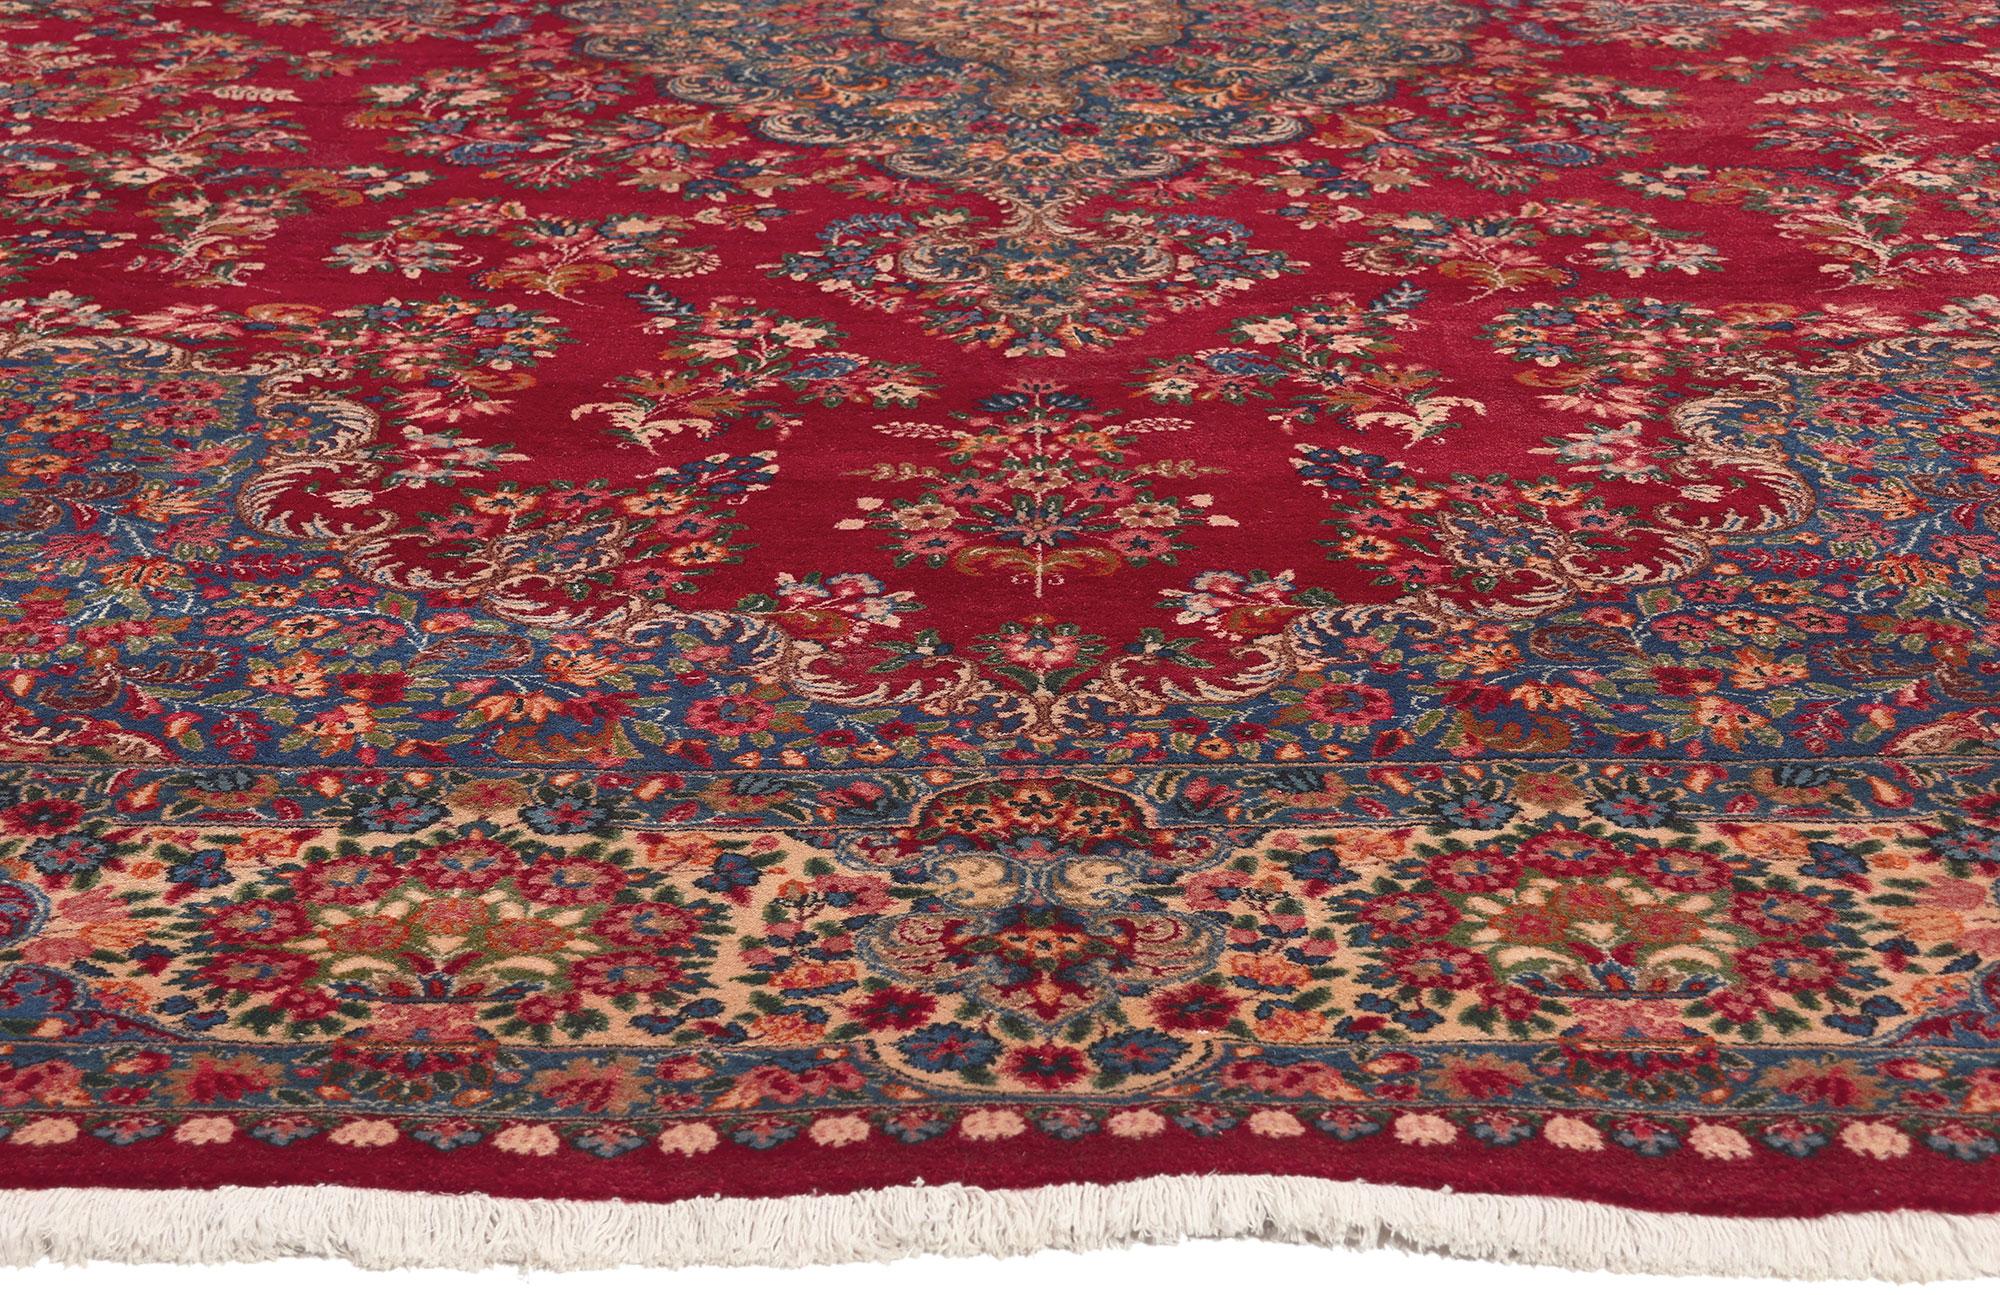 Vintage Persian Kerman Rug, Classic Elegance Meets Regal Charm In Good Condition For Sale In Dallas, TX